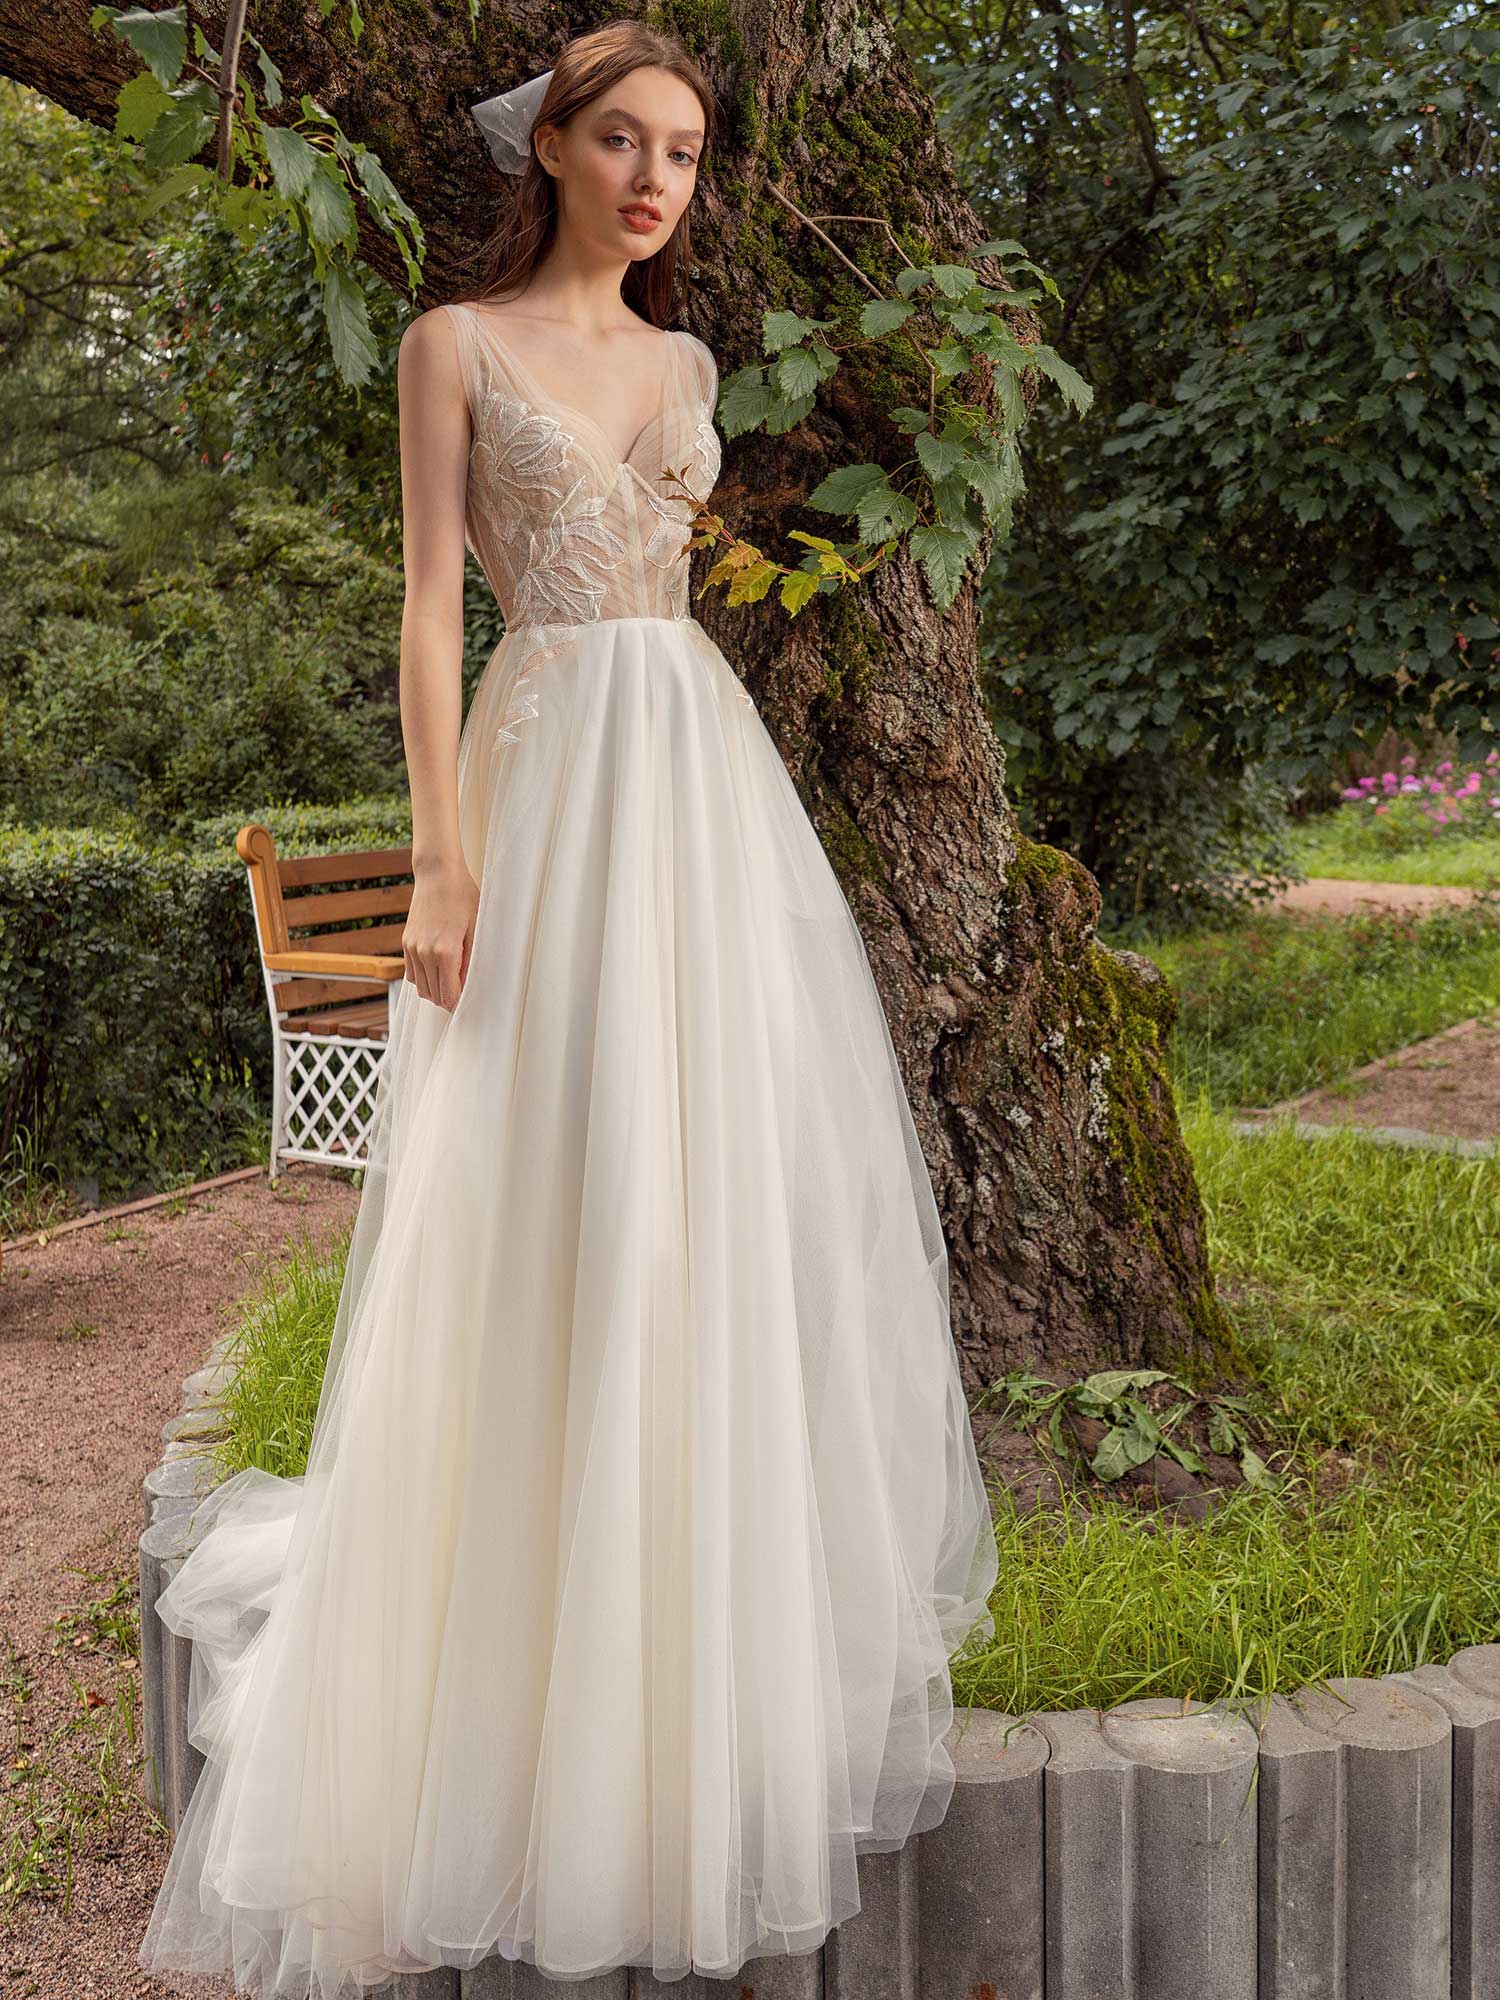 A-line wedding dress with bustier style corset, floral decor and pockets